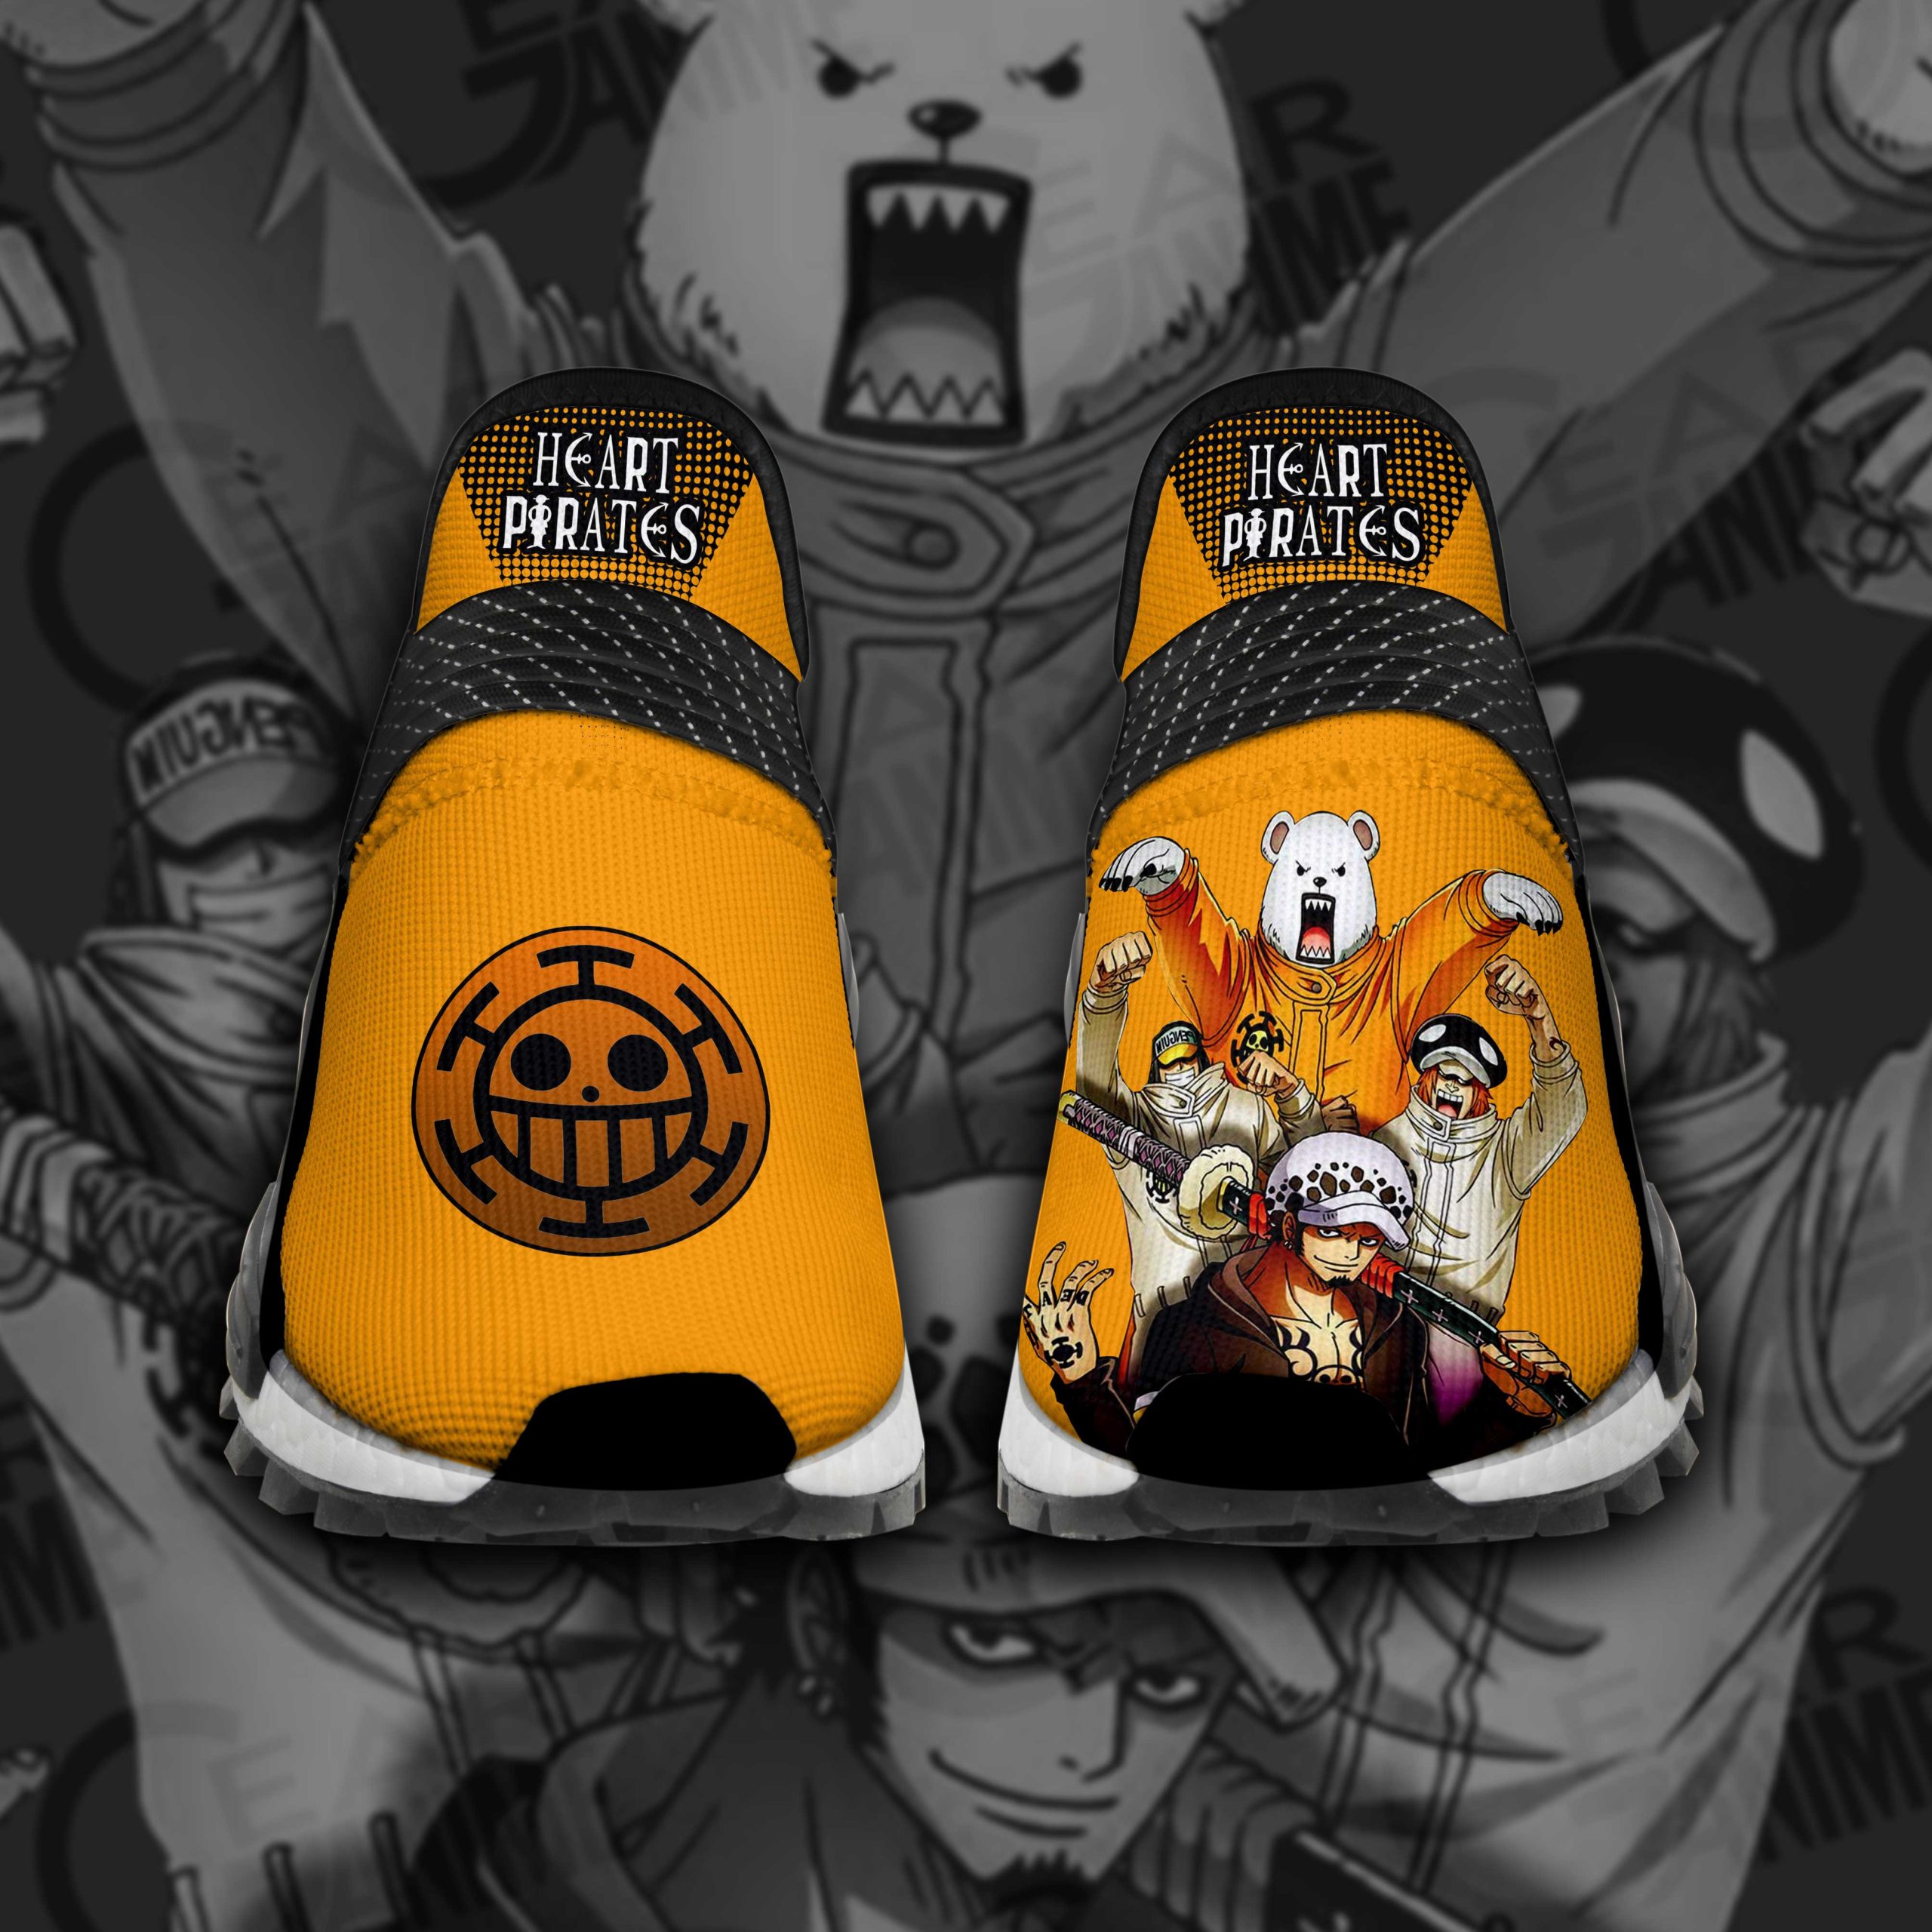 Heart Pirates Shoes One Piece Custom Anime Shoes TT12